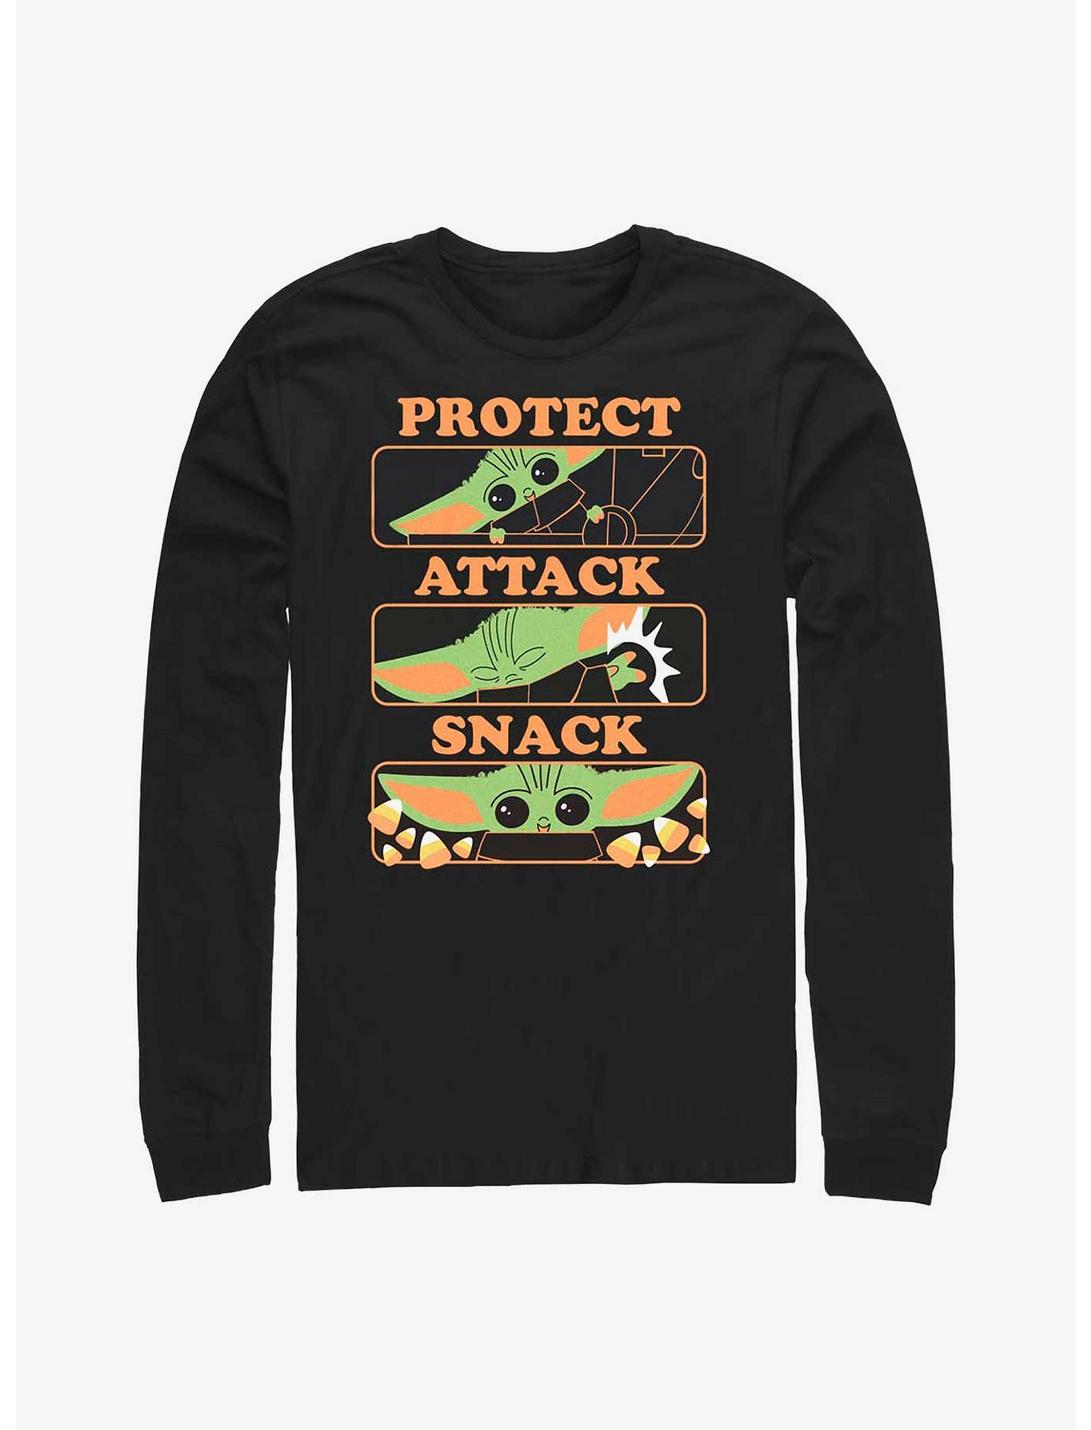 Star Wars The Mandalorian The Child Protect, Attack, & Snack Long-Sleeve T-Shirt, BLACK, hi-res